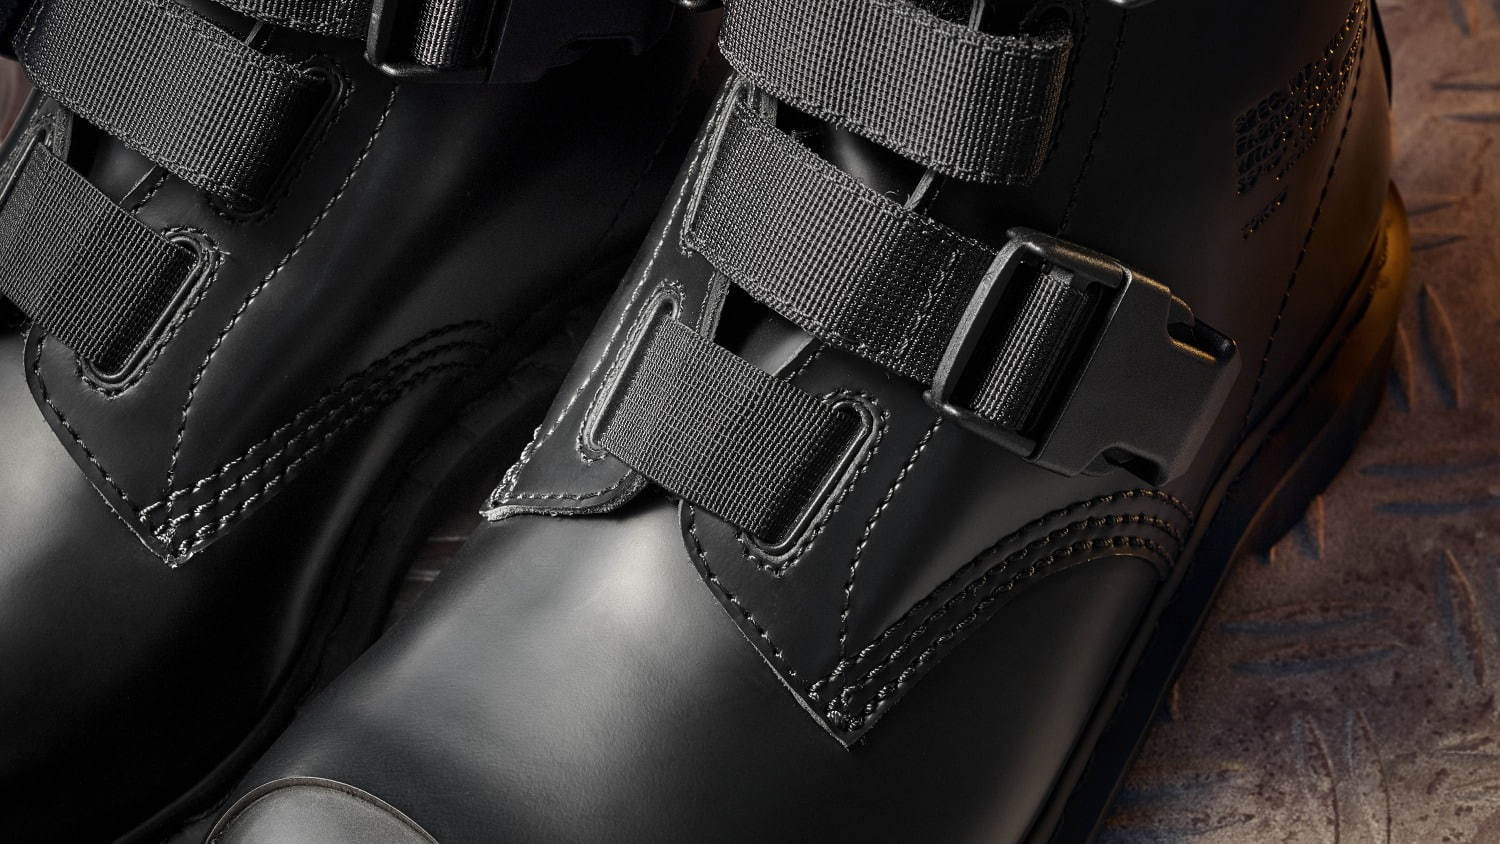 DR. MARTENS X WTAPS 1460 REMASTERED BOOT